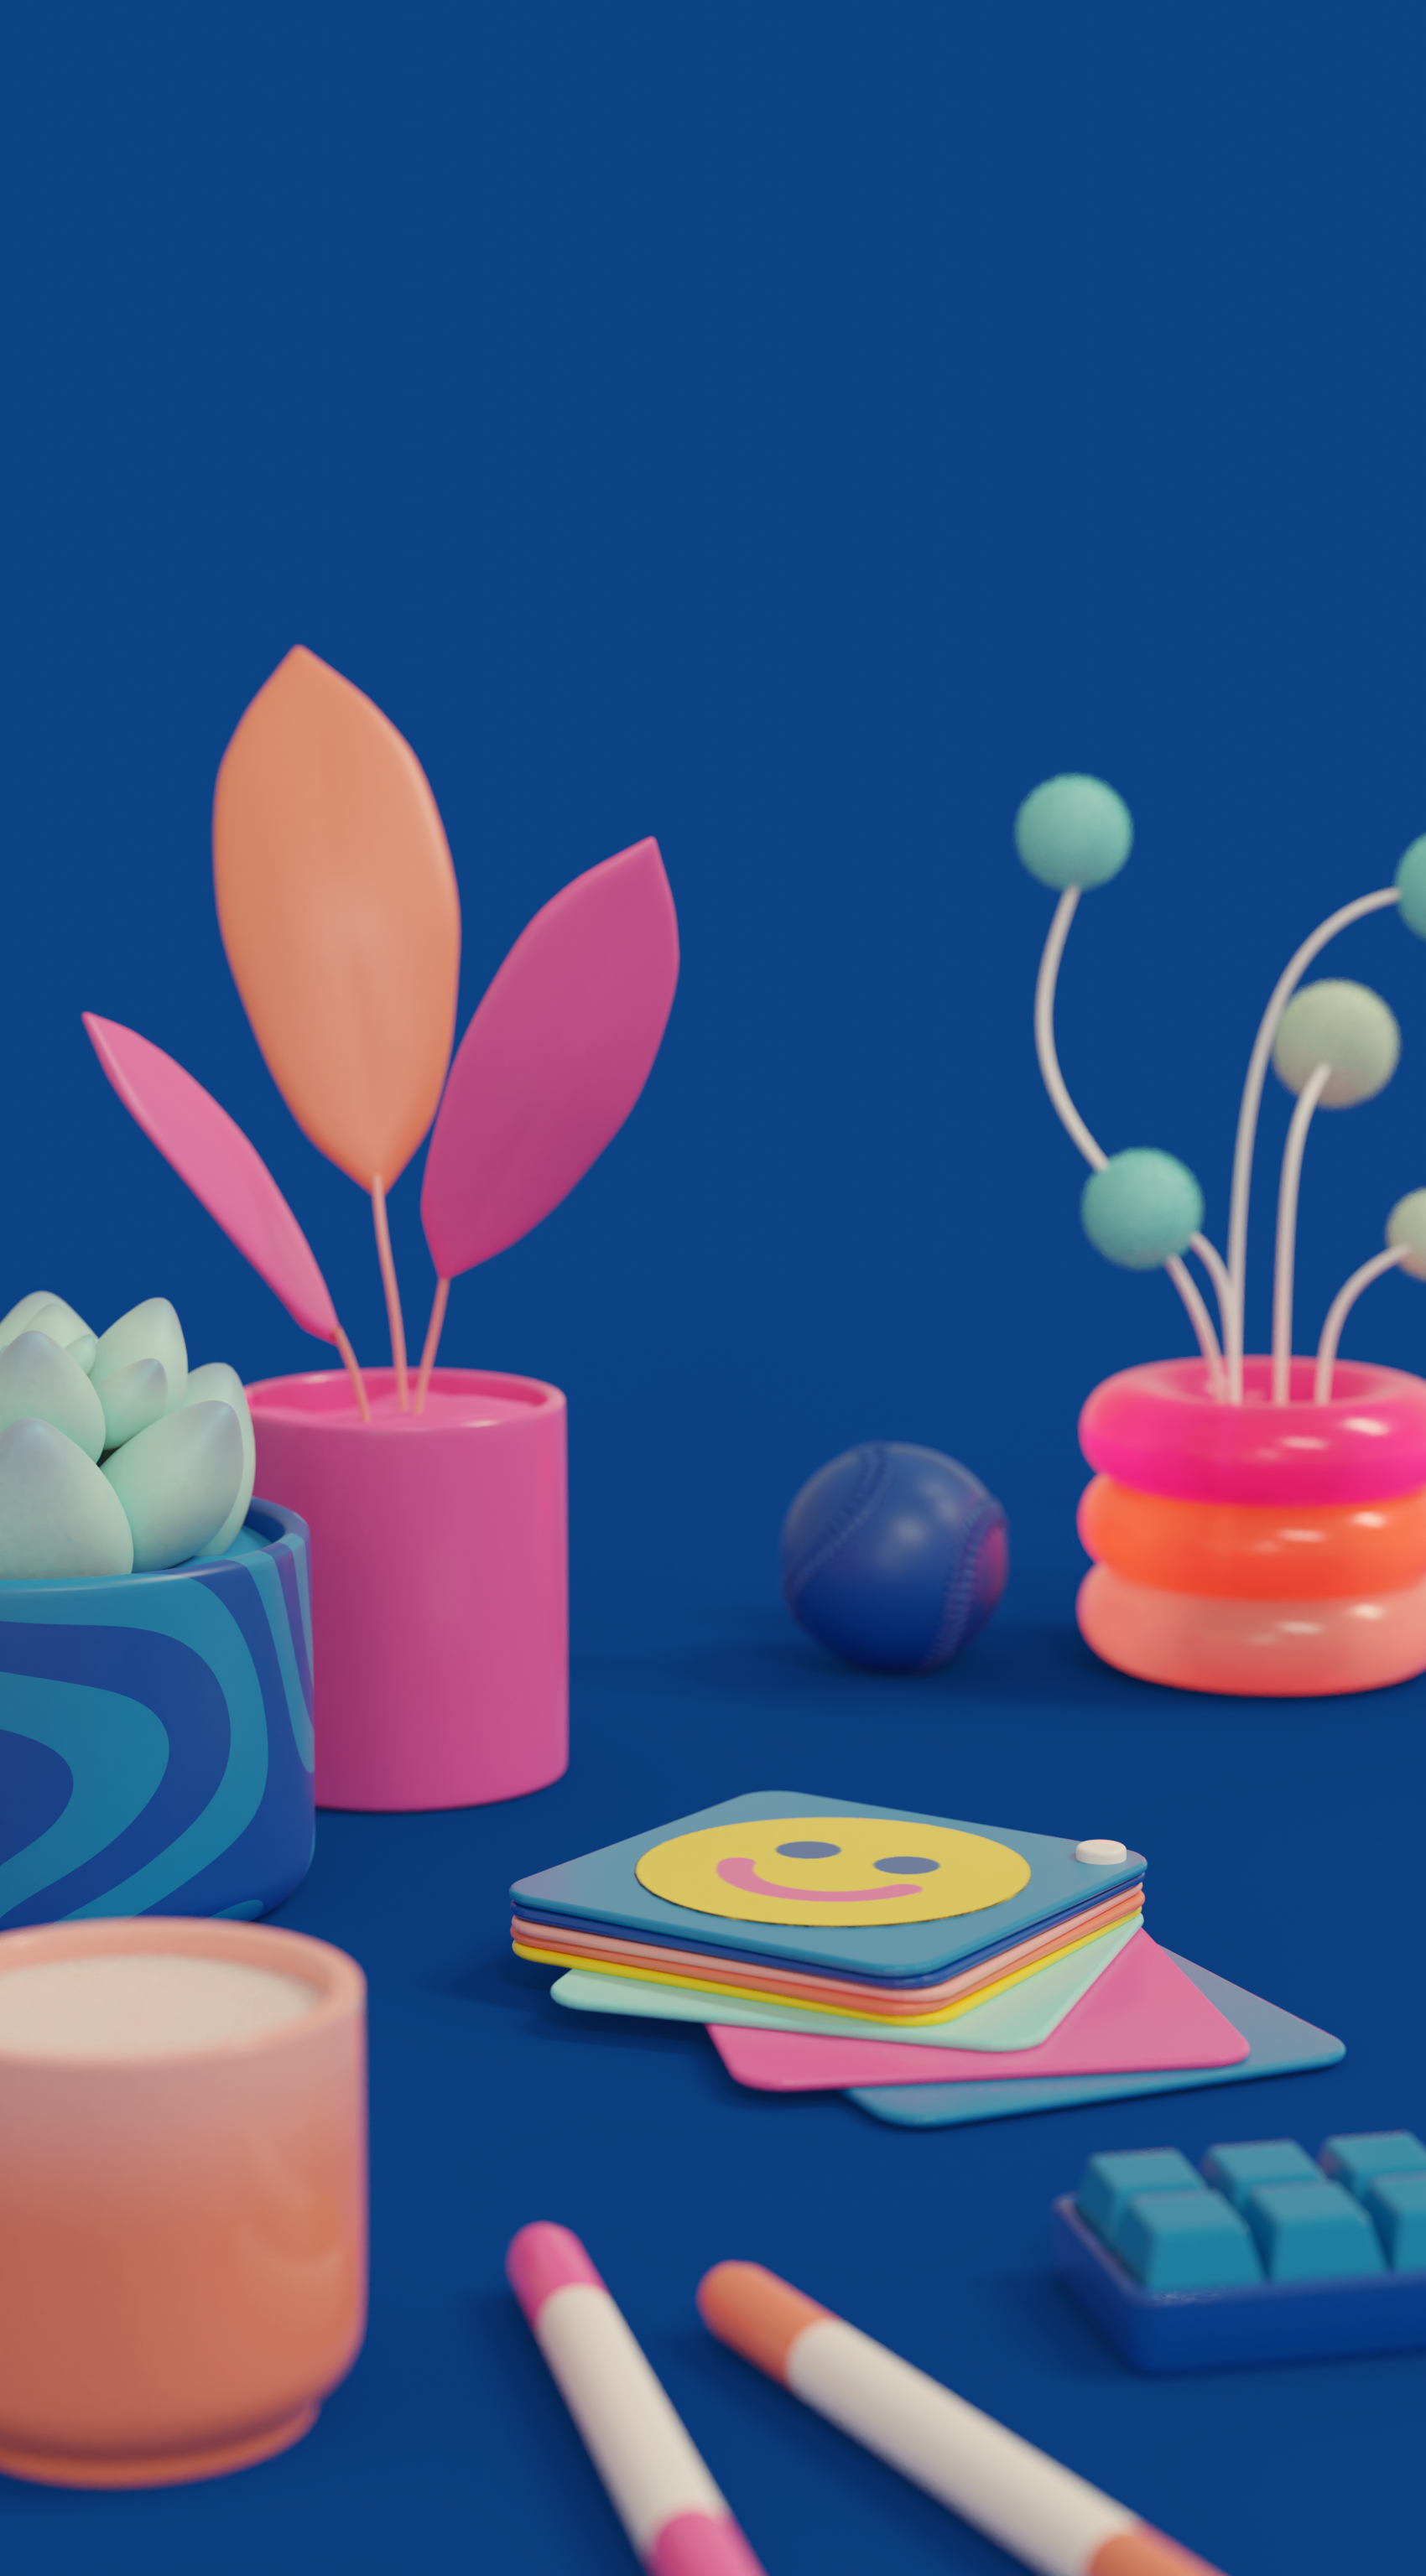 3D render depicting scattered objects: a square color swatch book, a small keyboard, some markers, and various plants.